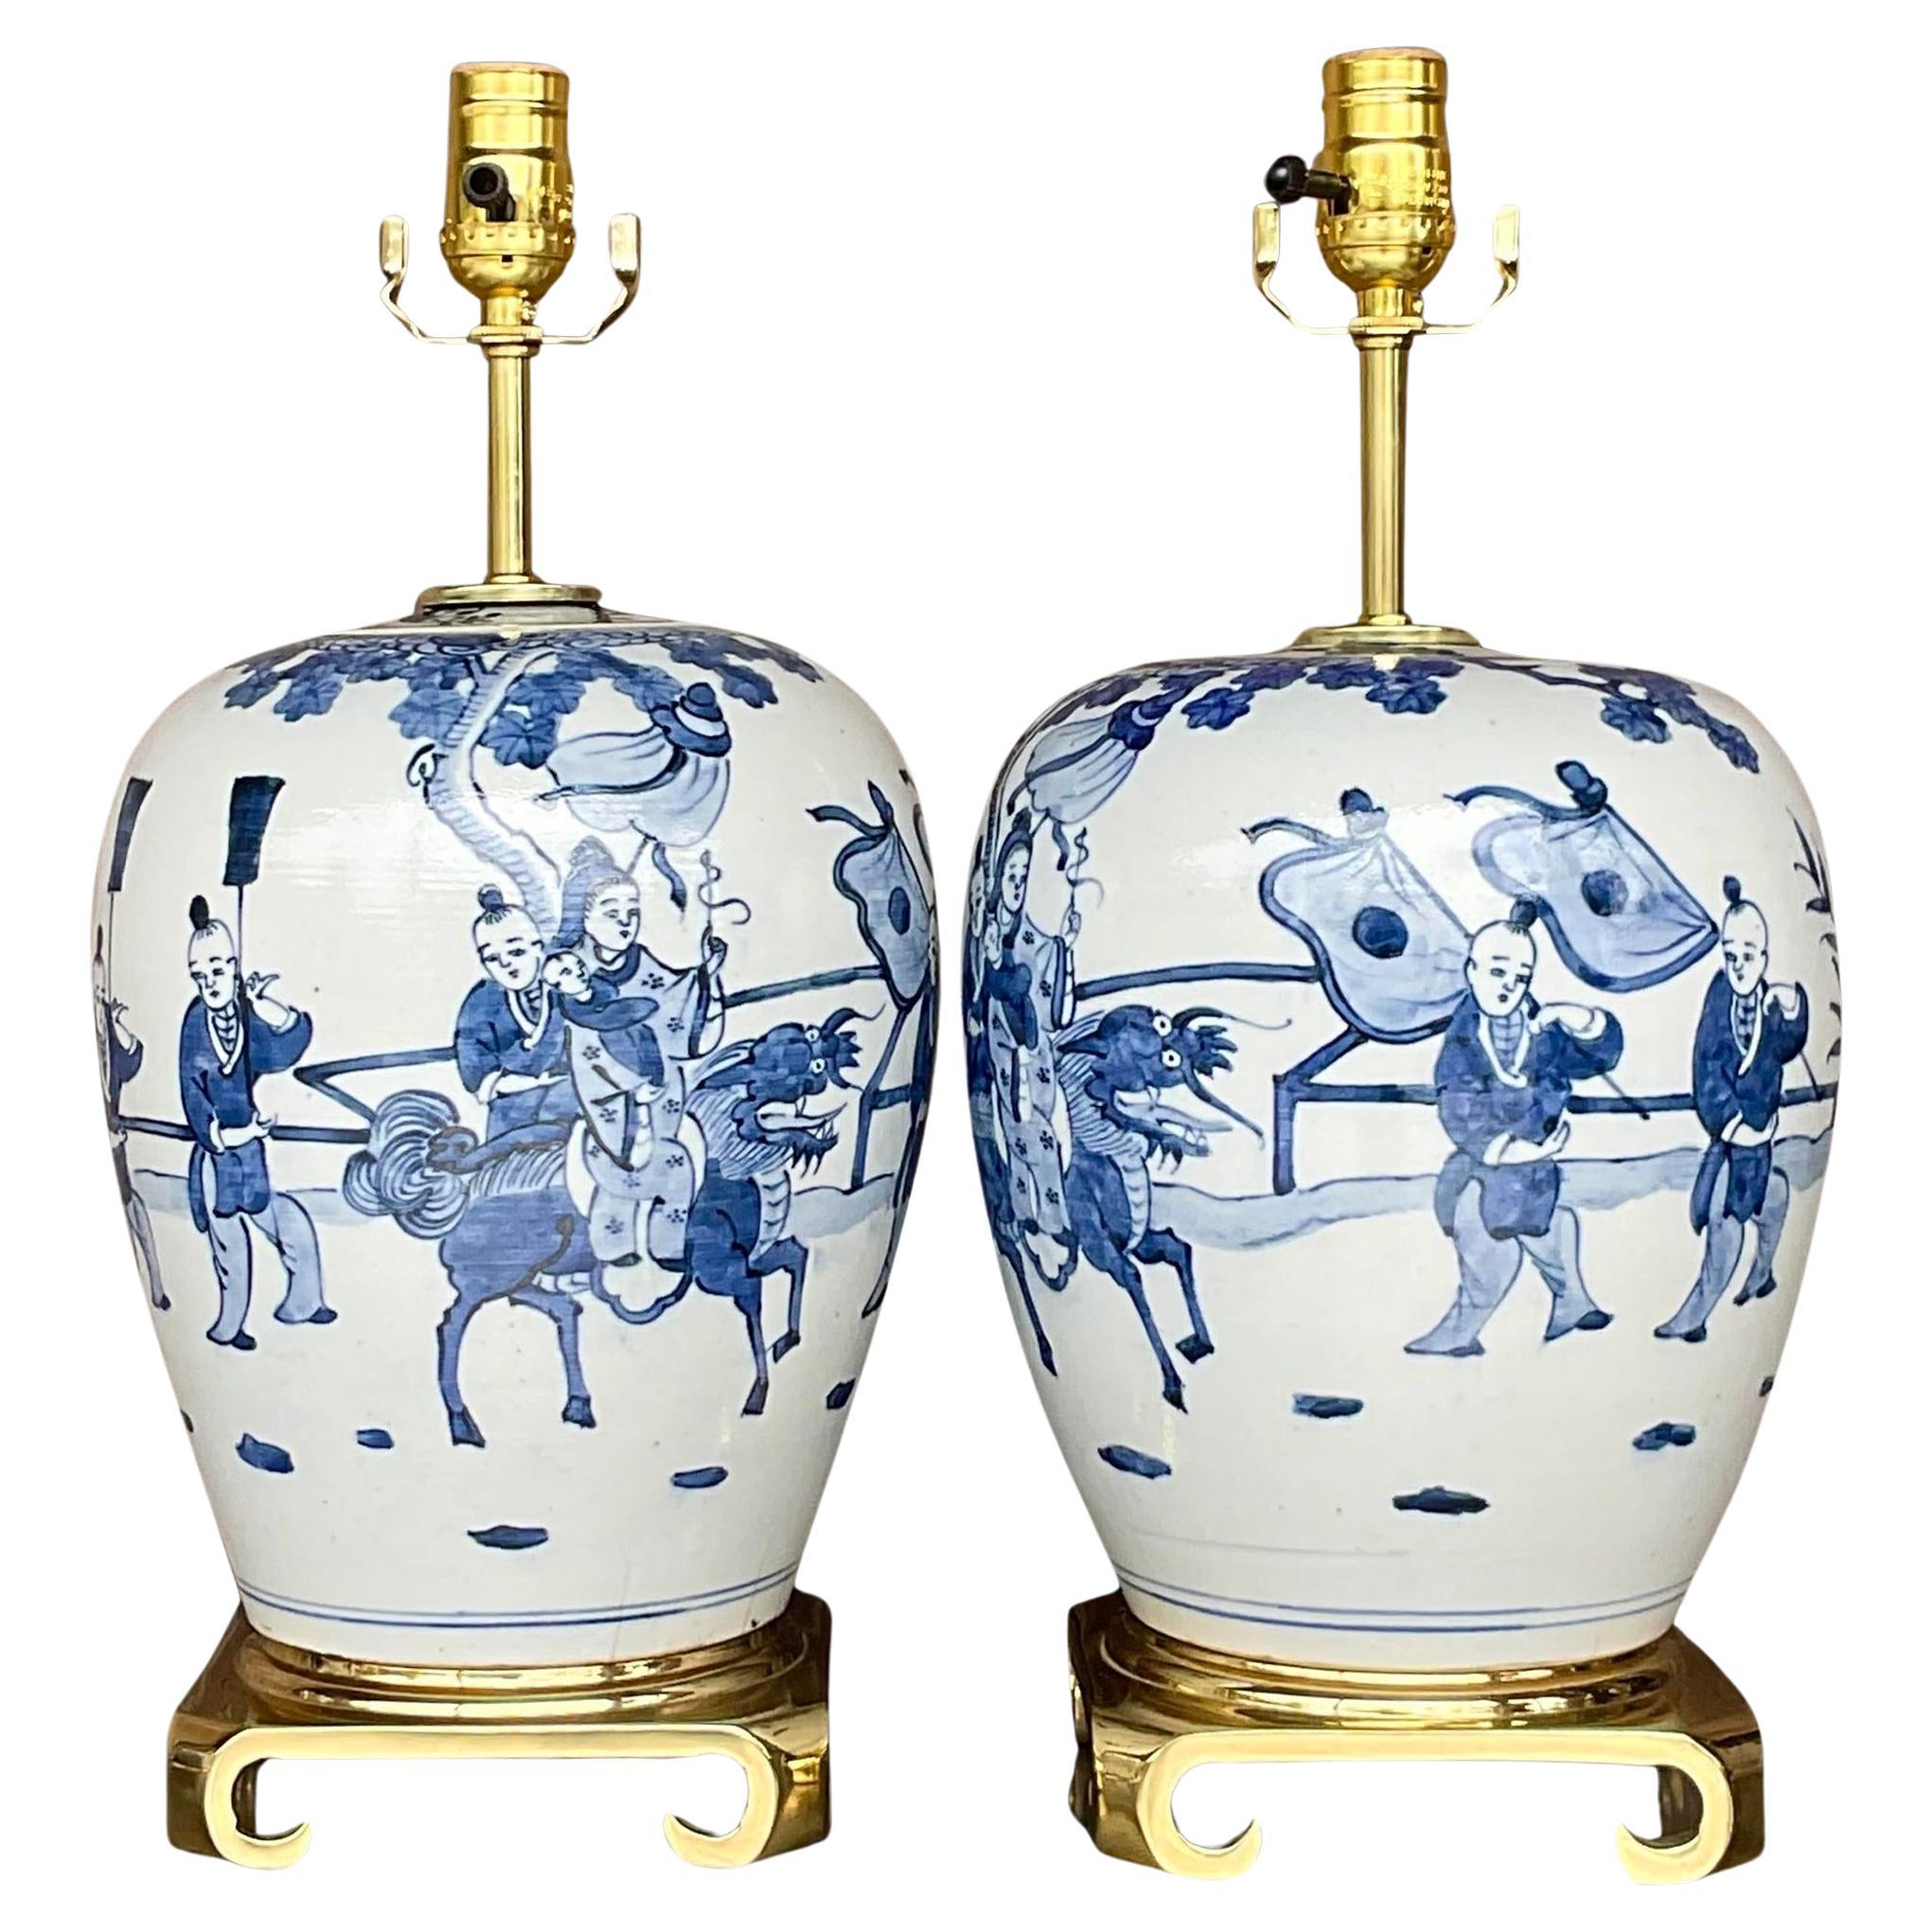 Vintage Asian Blue and White Pastoral Glazed Ceramic Lamps - a Pair For Sale